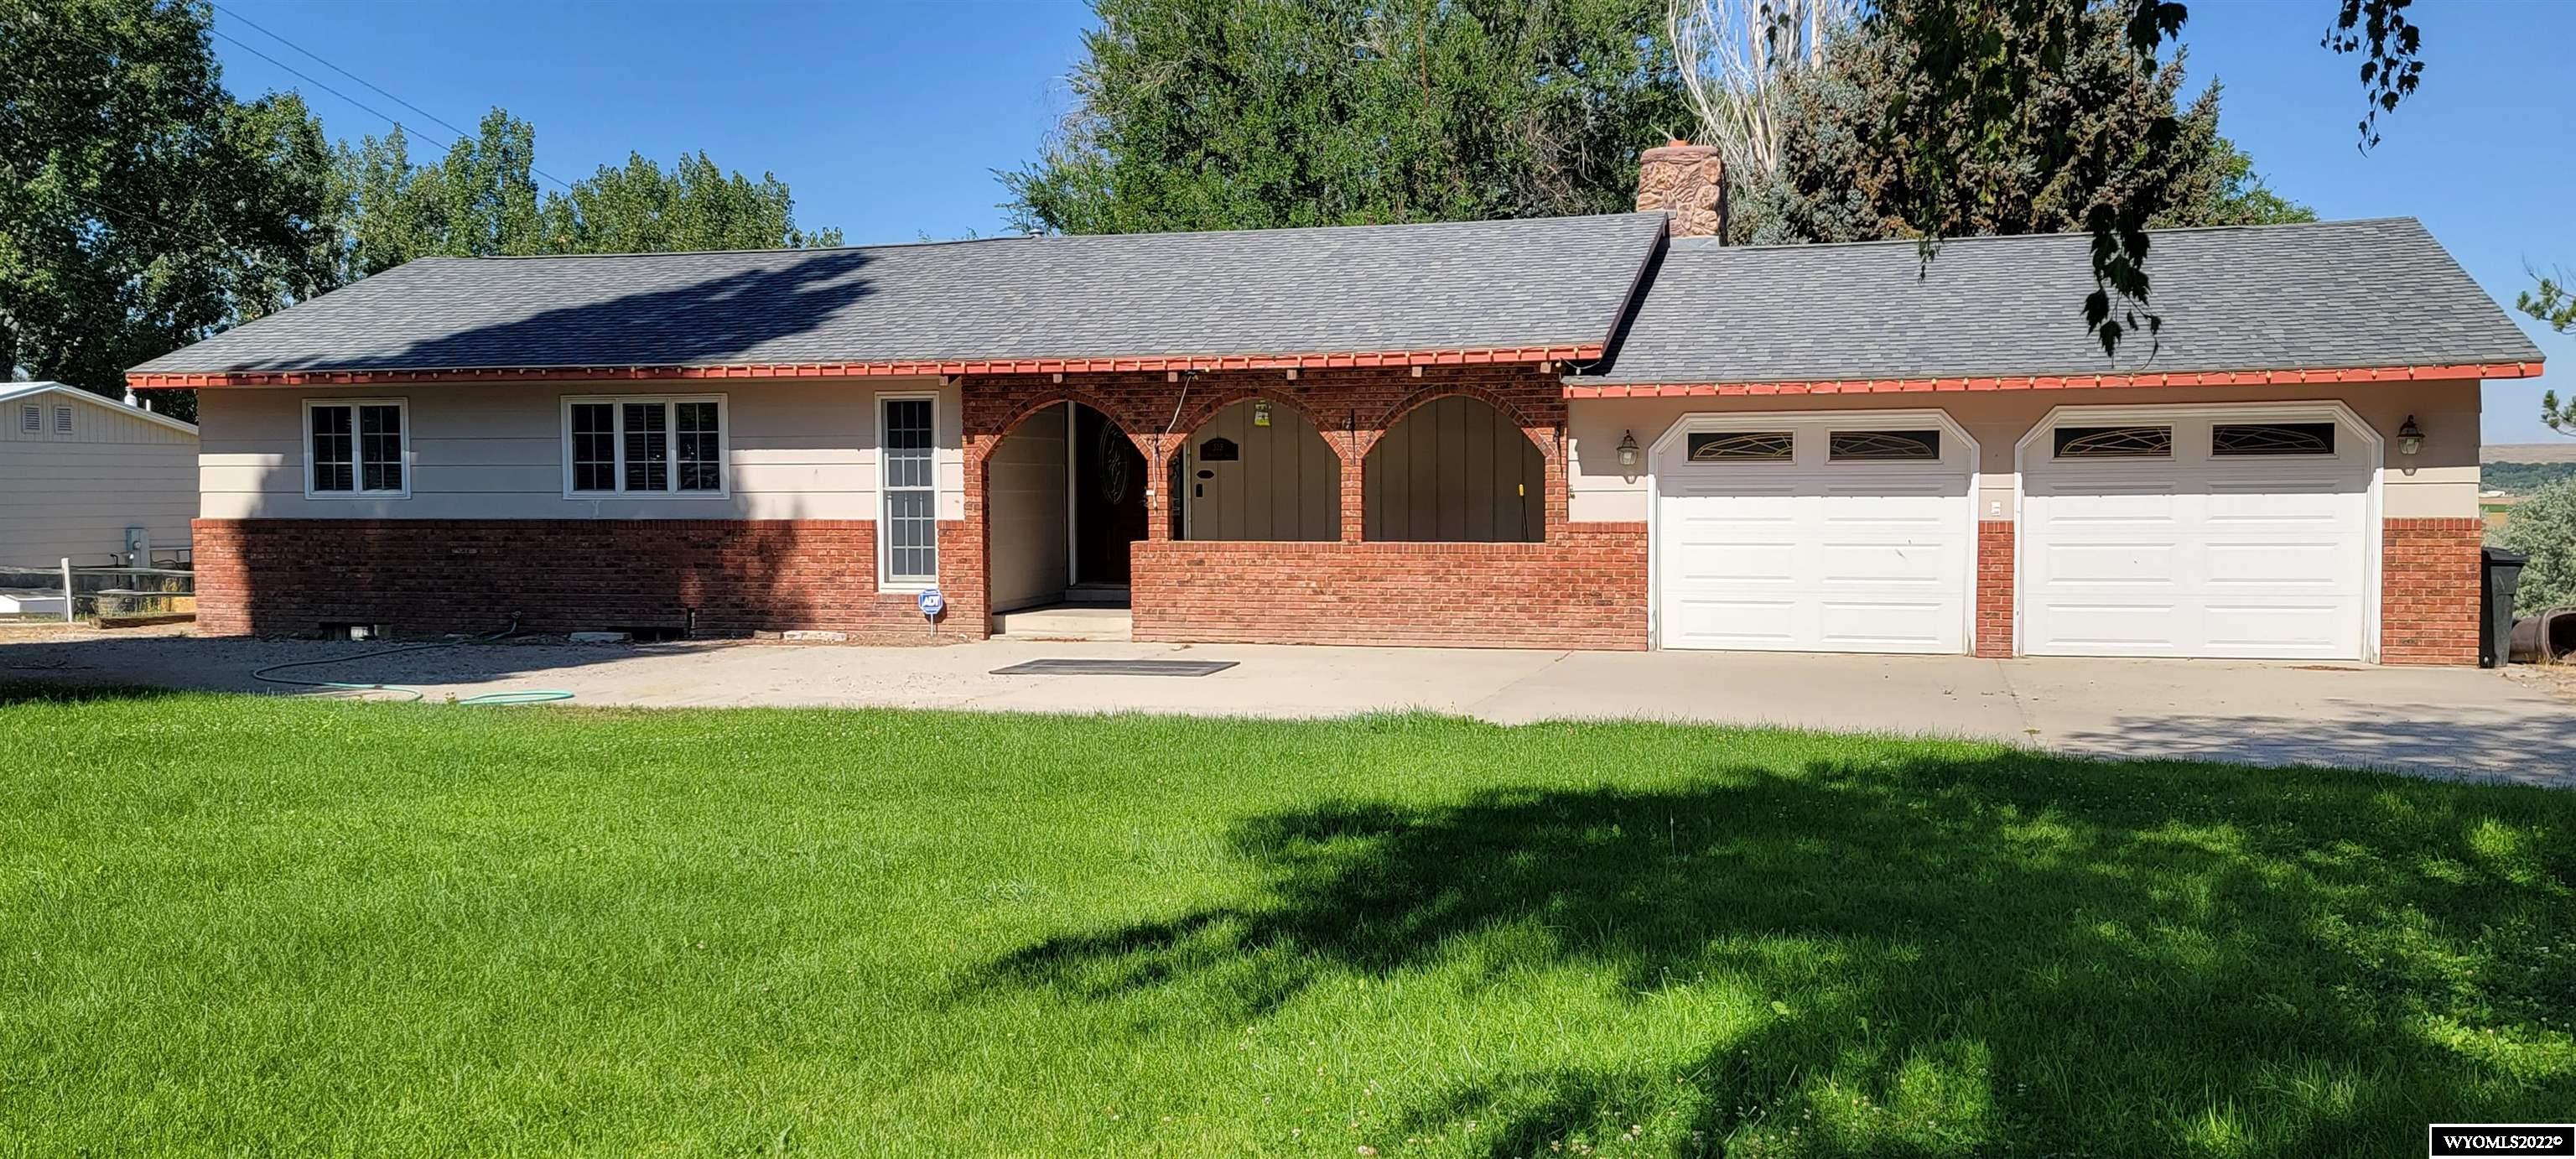 Excellent Location, backyard overlooking the Worland Valley.  4 bedroom, 3 baths.  Master Suite. Great utility room.  Wood burning fireplace, Newer Roof, 2-car Garage